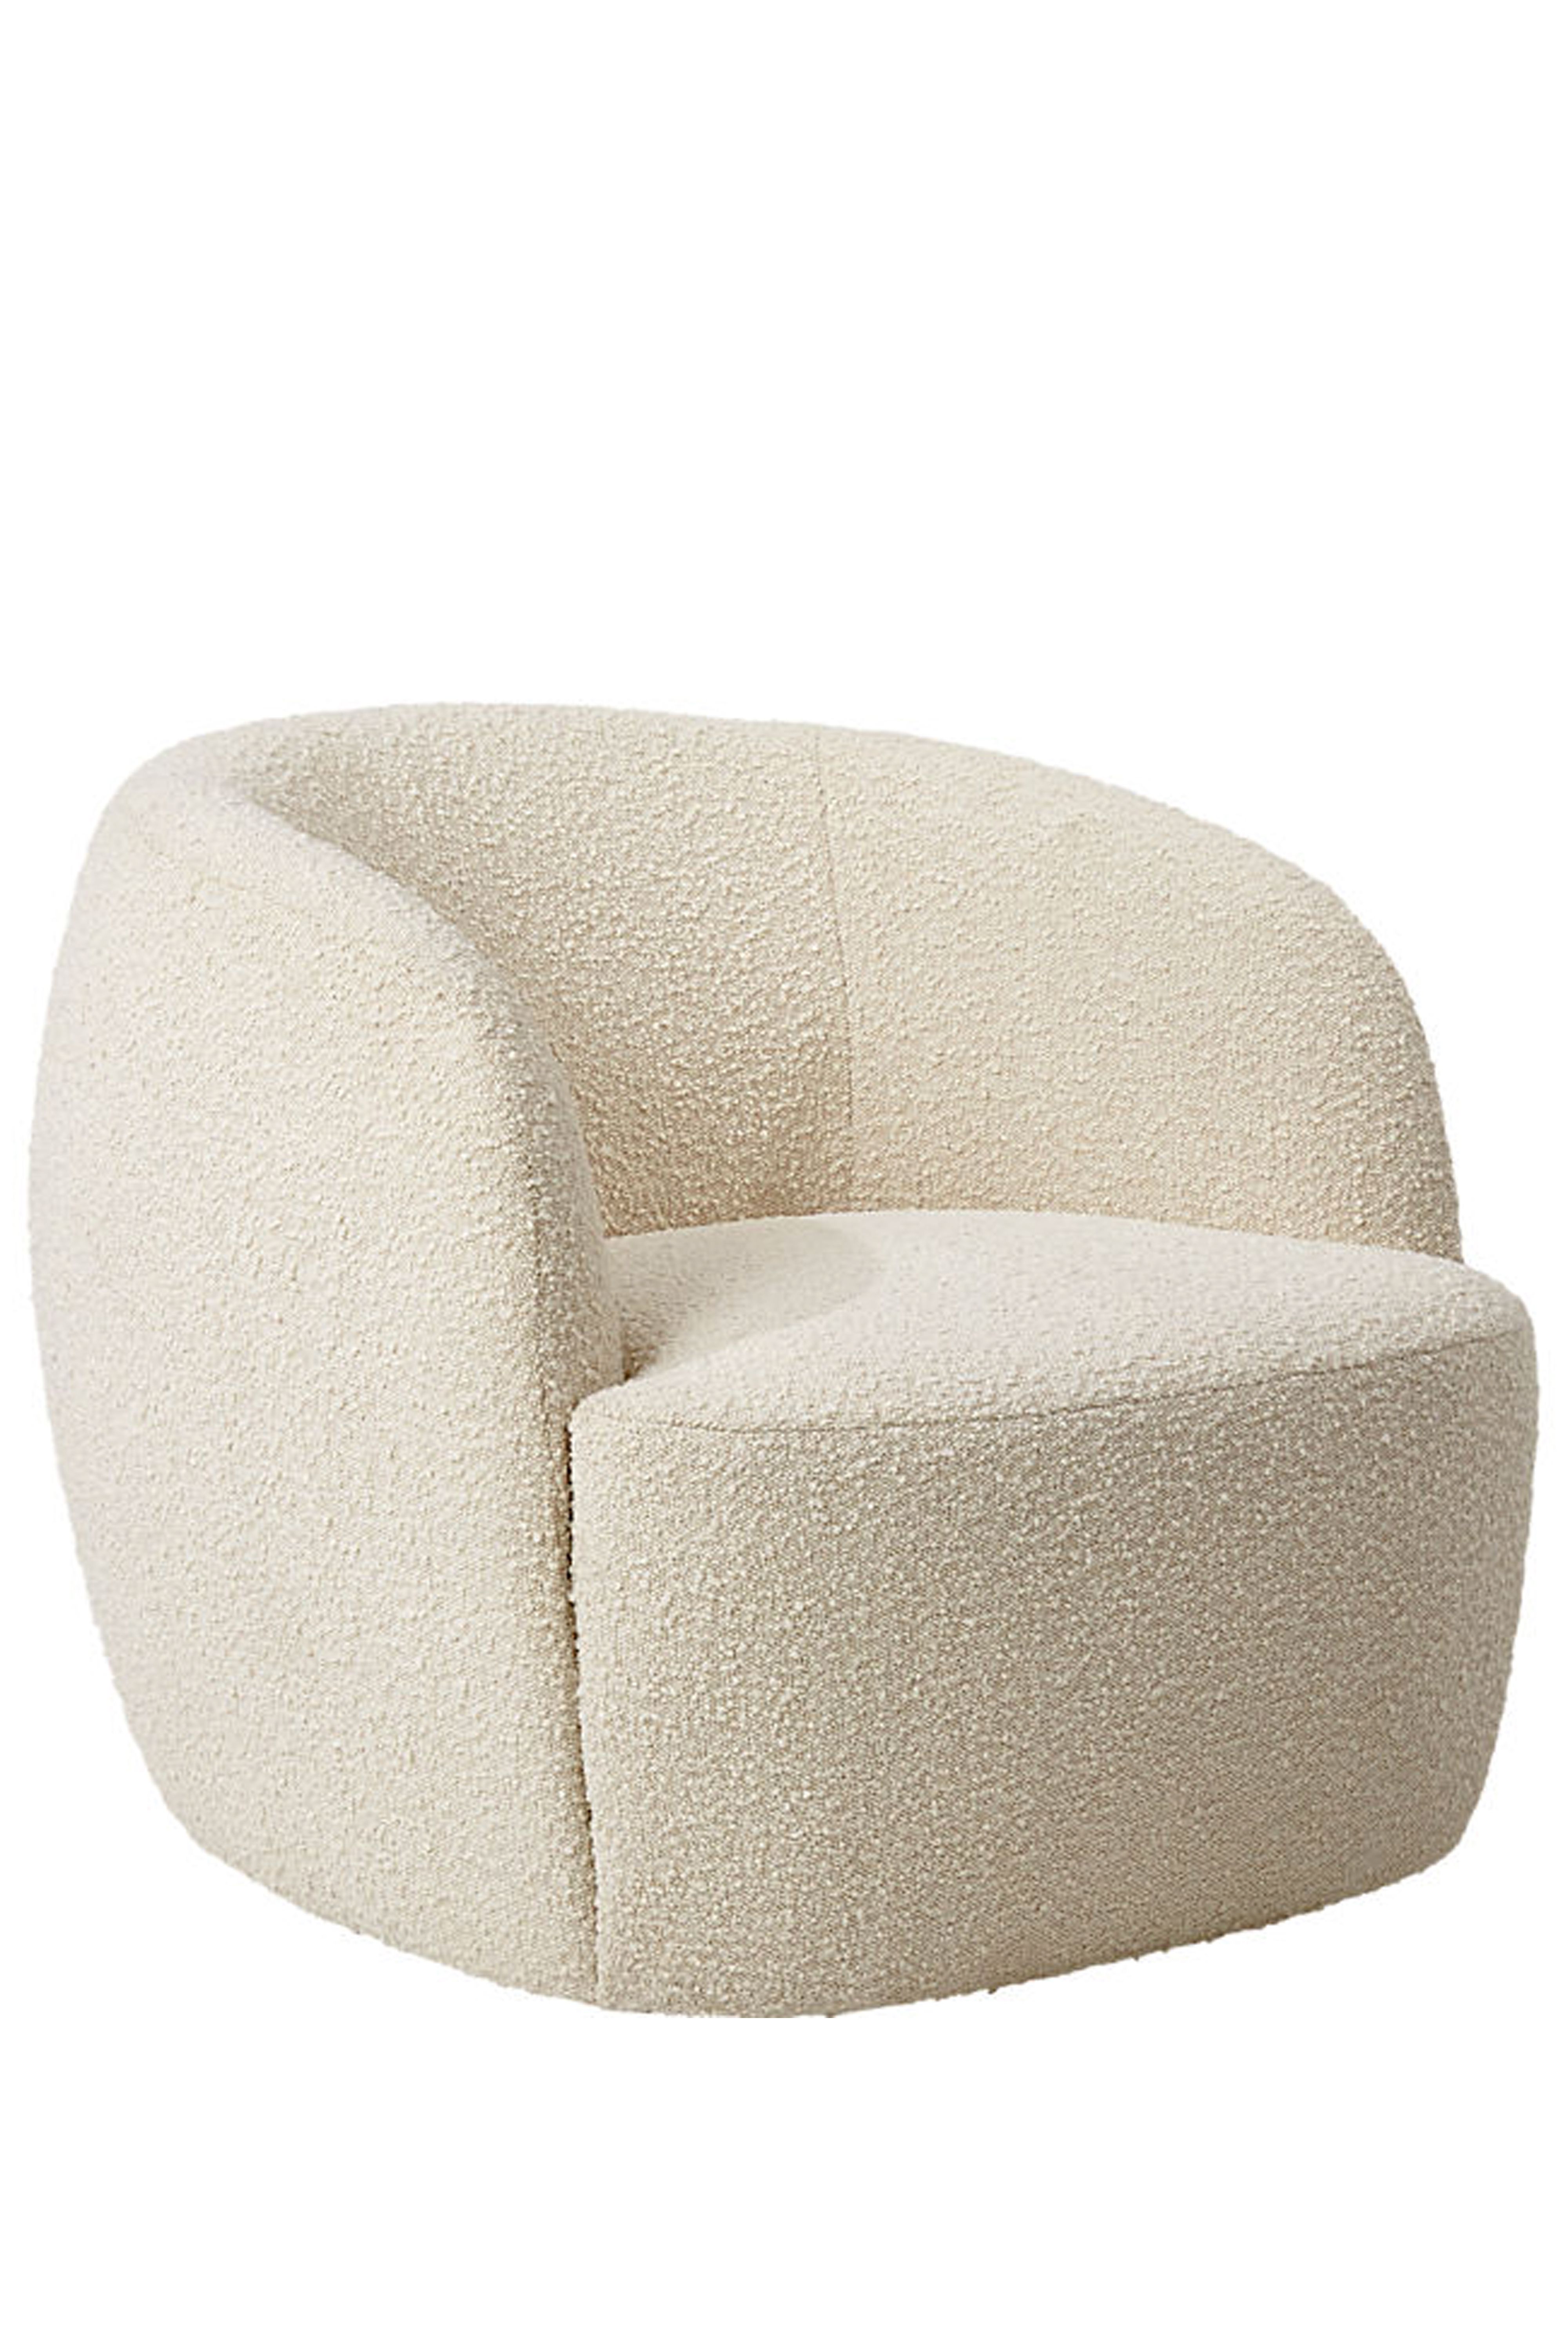 The Best Tufted Neutral Chairs   Furniture, Home decor, Living room designs